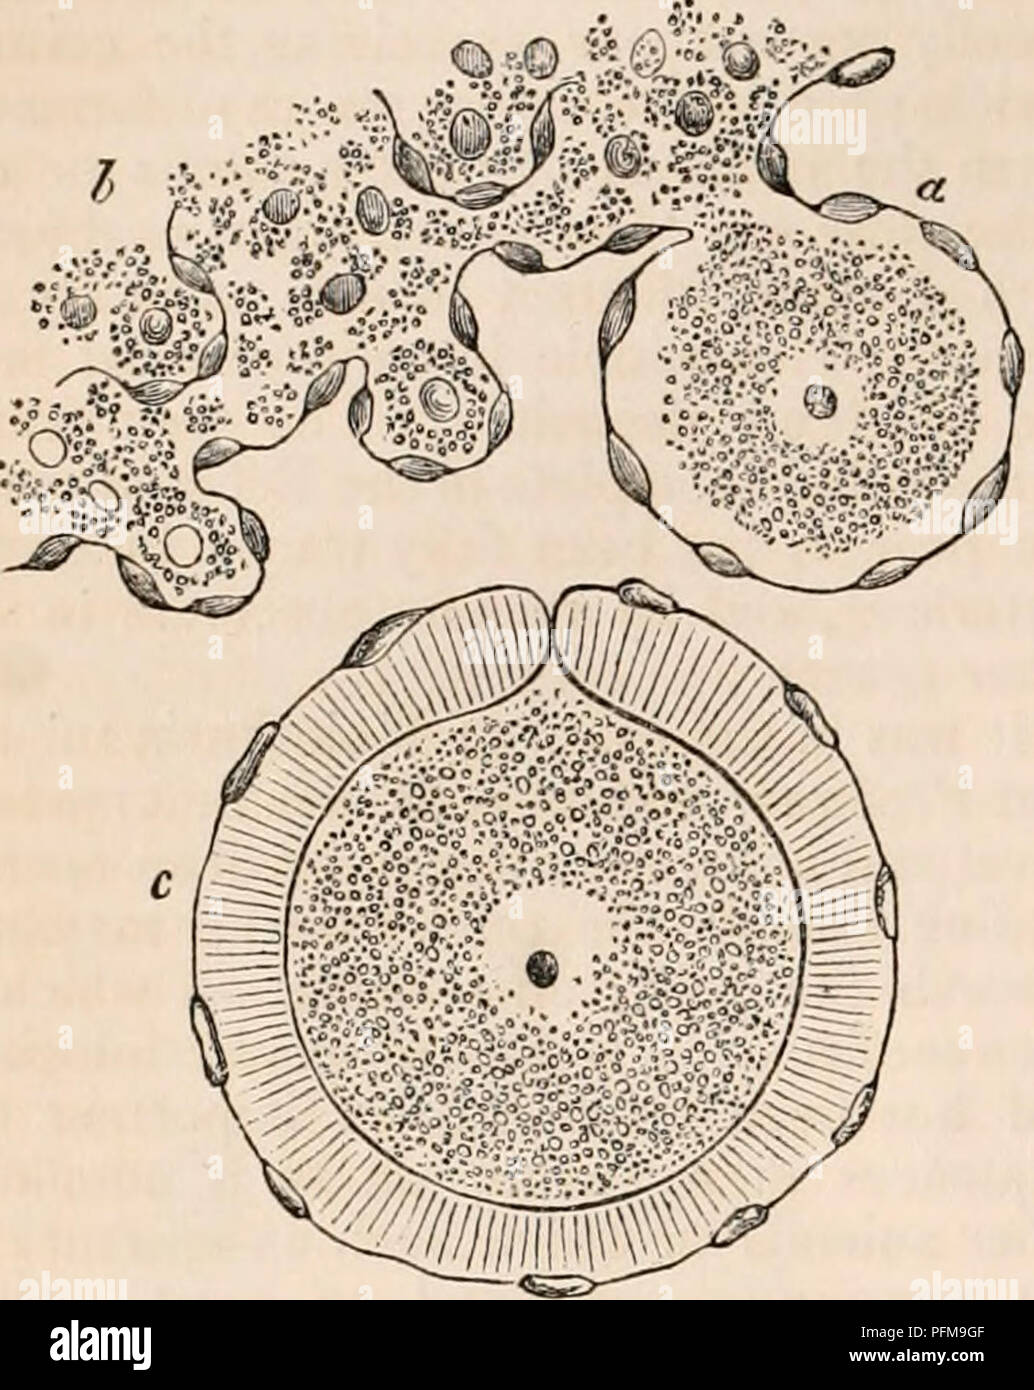 . The cyclopædia of anatomy and physiology. Anatomy; Physiology; Zoology. [126] OVUM. lated condition of the ovum in the ovary, that it is in fact the remains of the divided pedicle after the ovum is separated from the place of its original formation. Fig. 91*.. Ovum and Mlcropyh in Holothuria tubulosa. (From Ley dig.) a, b. A small portion of the ovary from the inner surface, containing ova in various earlier stages of their development; three of them project from the inner surface, of which a is the most de- veloped. In this one the pediculated attachment and enclosure of the ovum by the nuc Stock Photo